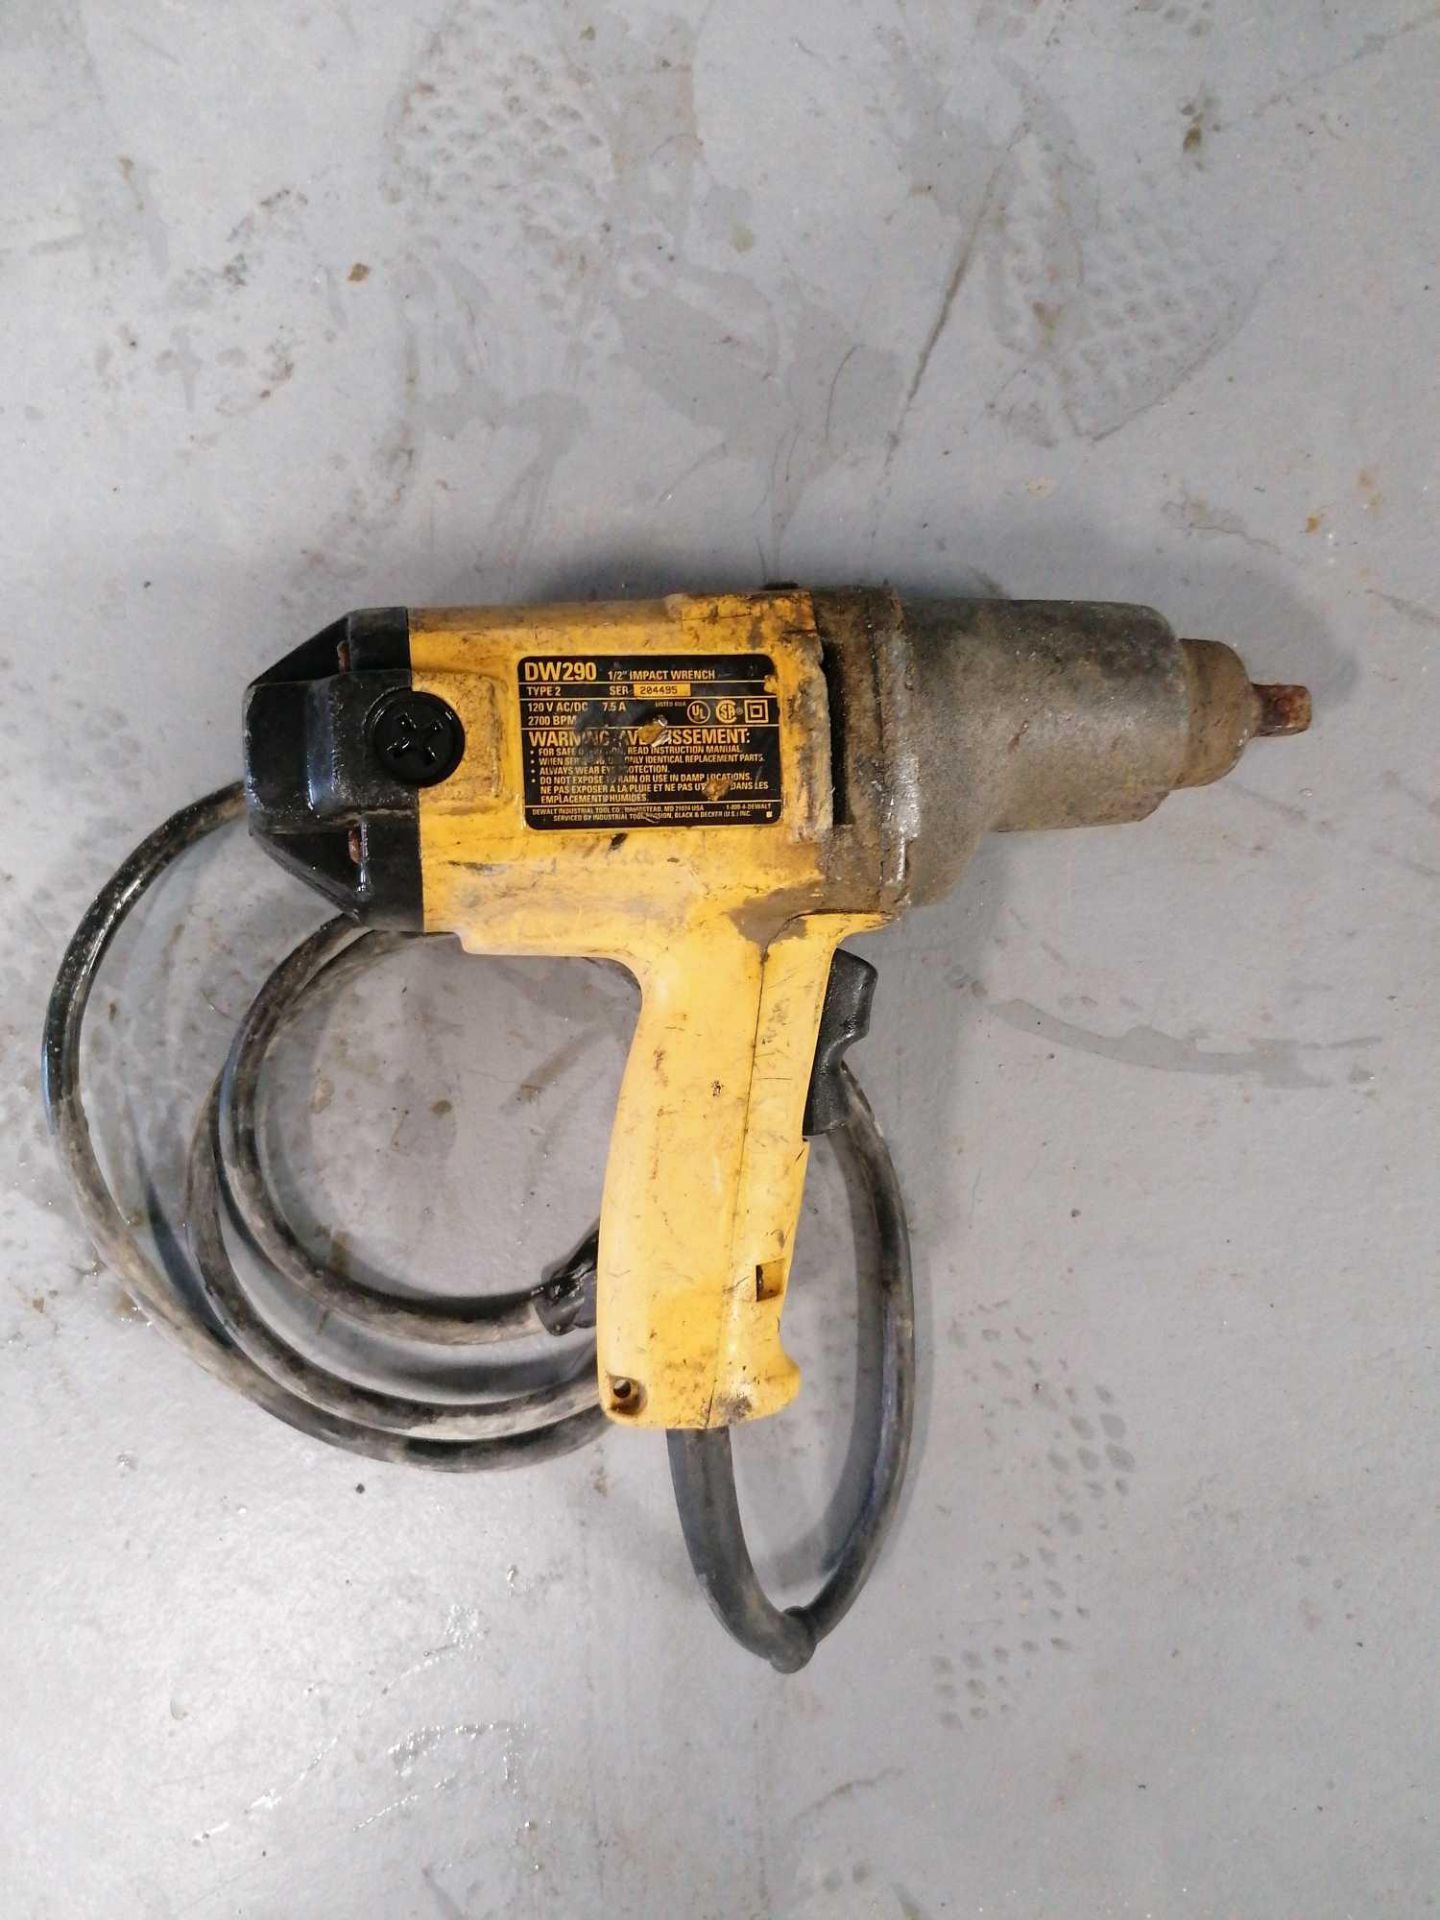 (2) Dewalt DW290 Corded Electric Impact Wrench - Image 2 of 3